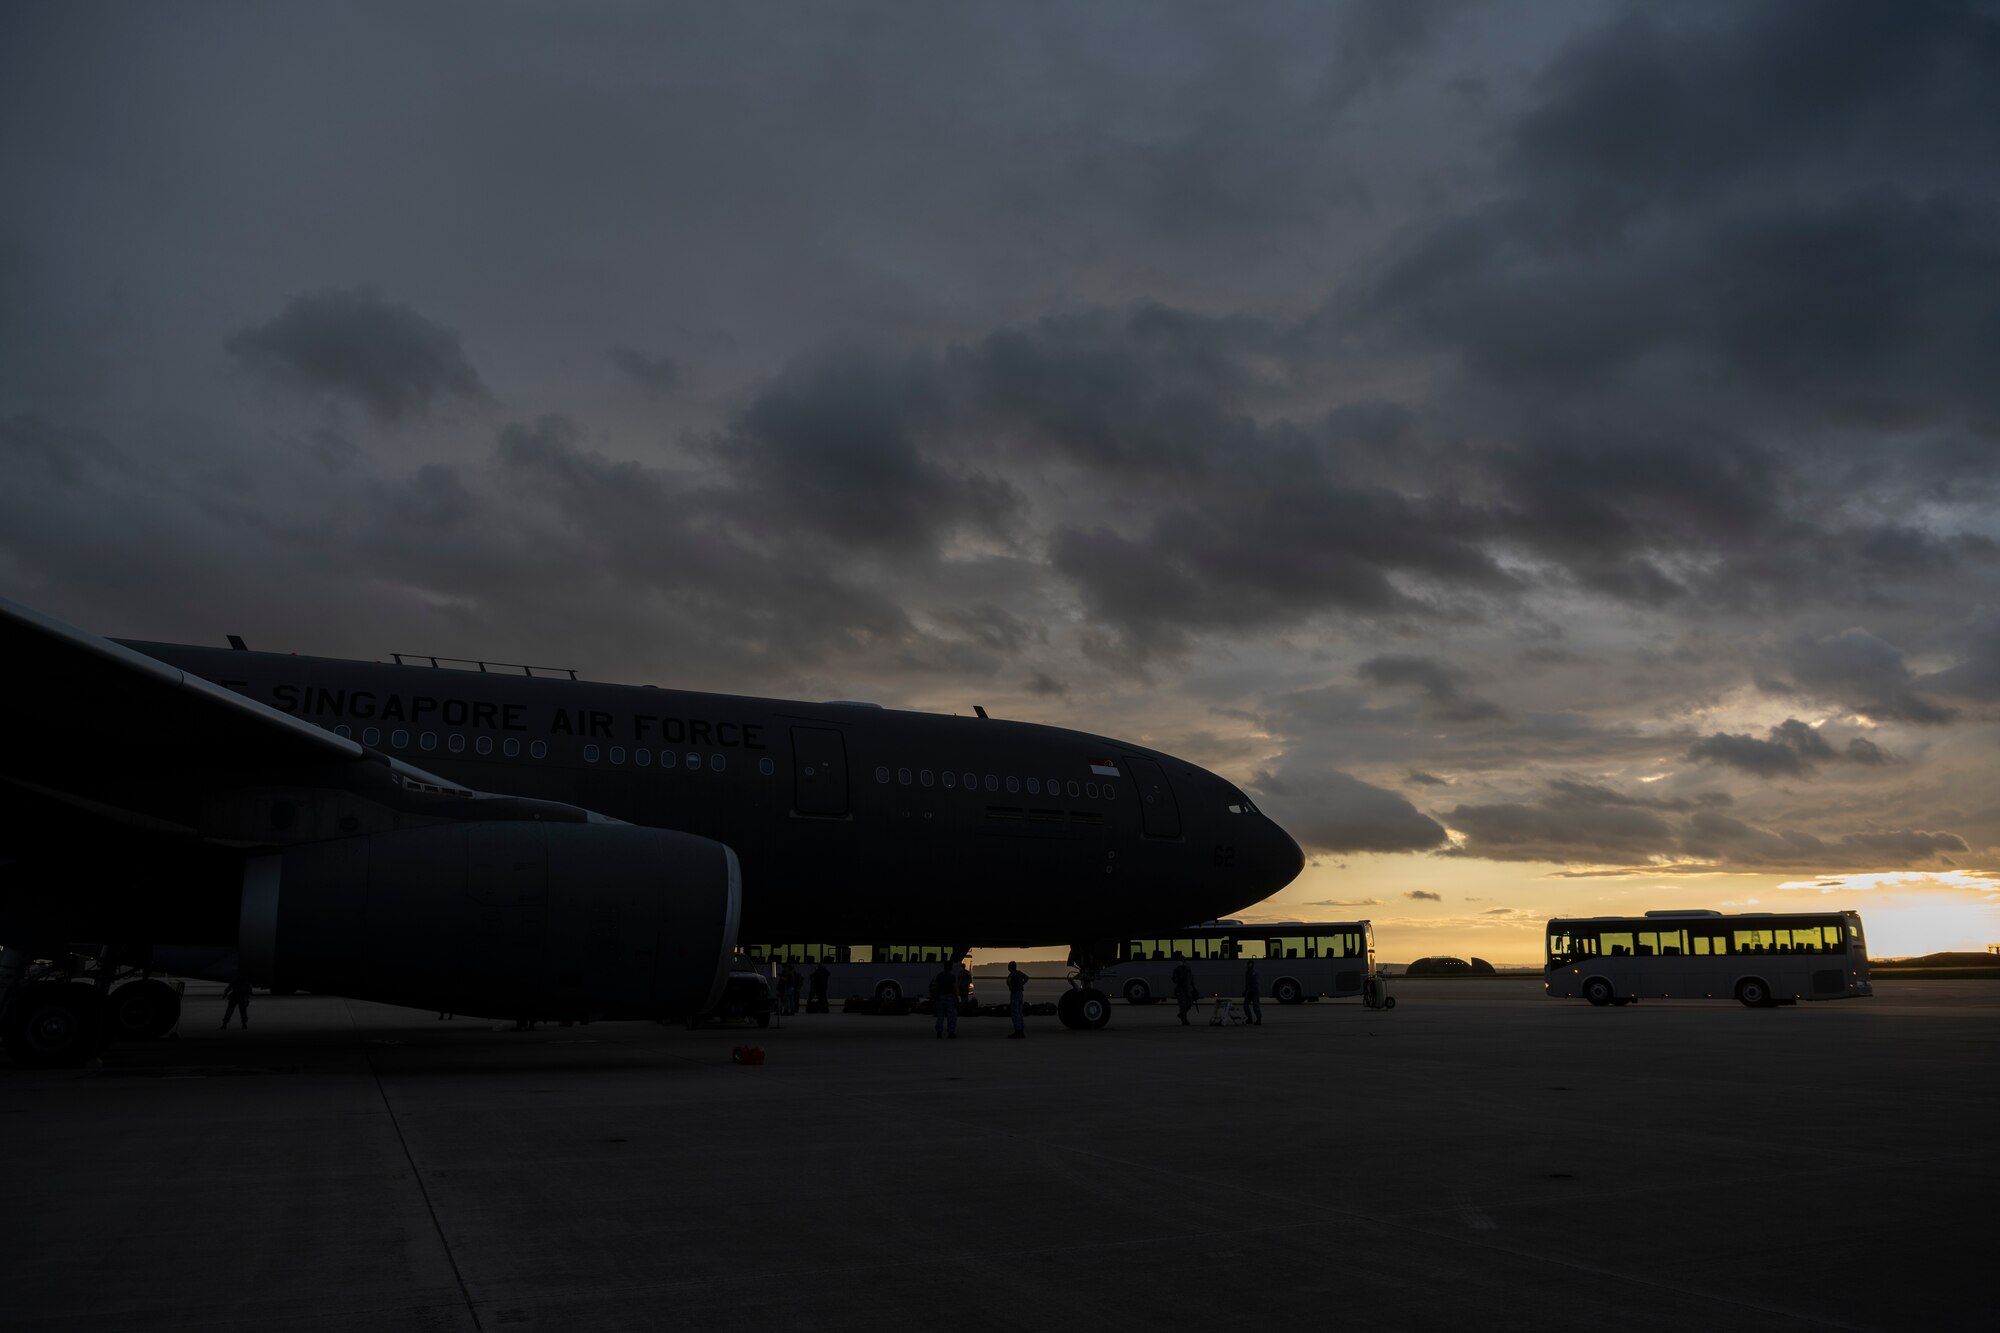 U.S. Air Force buses wait to transport newly arrived members of the Singapore Armed Forces on the flightline of Spangdahlem Air Base, Germany, Aug. 27, 2021.